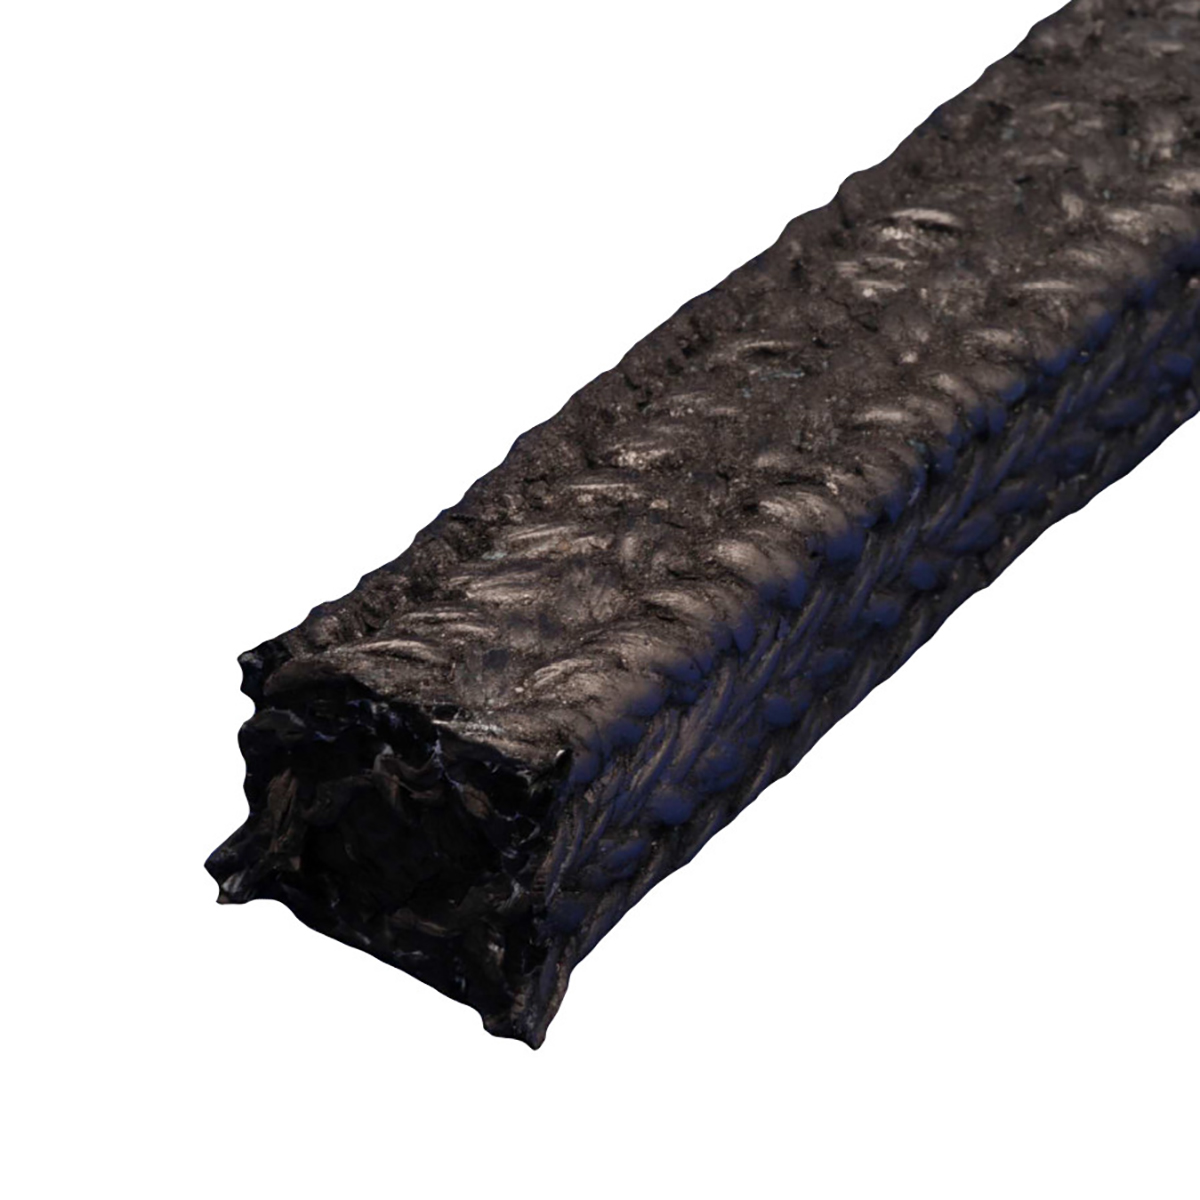 A carbon fibre packing with graphite flakes, Marigold 4000G Packing is designed for high pressure service in pumps and valves with aggressive media.